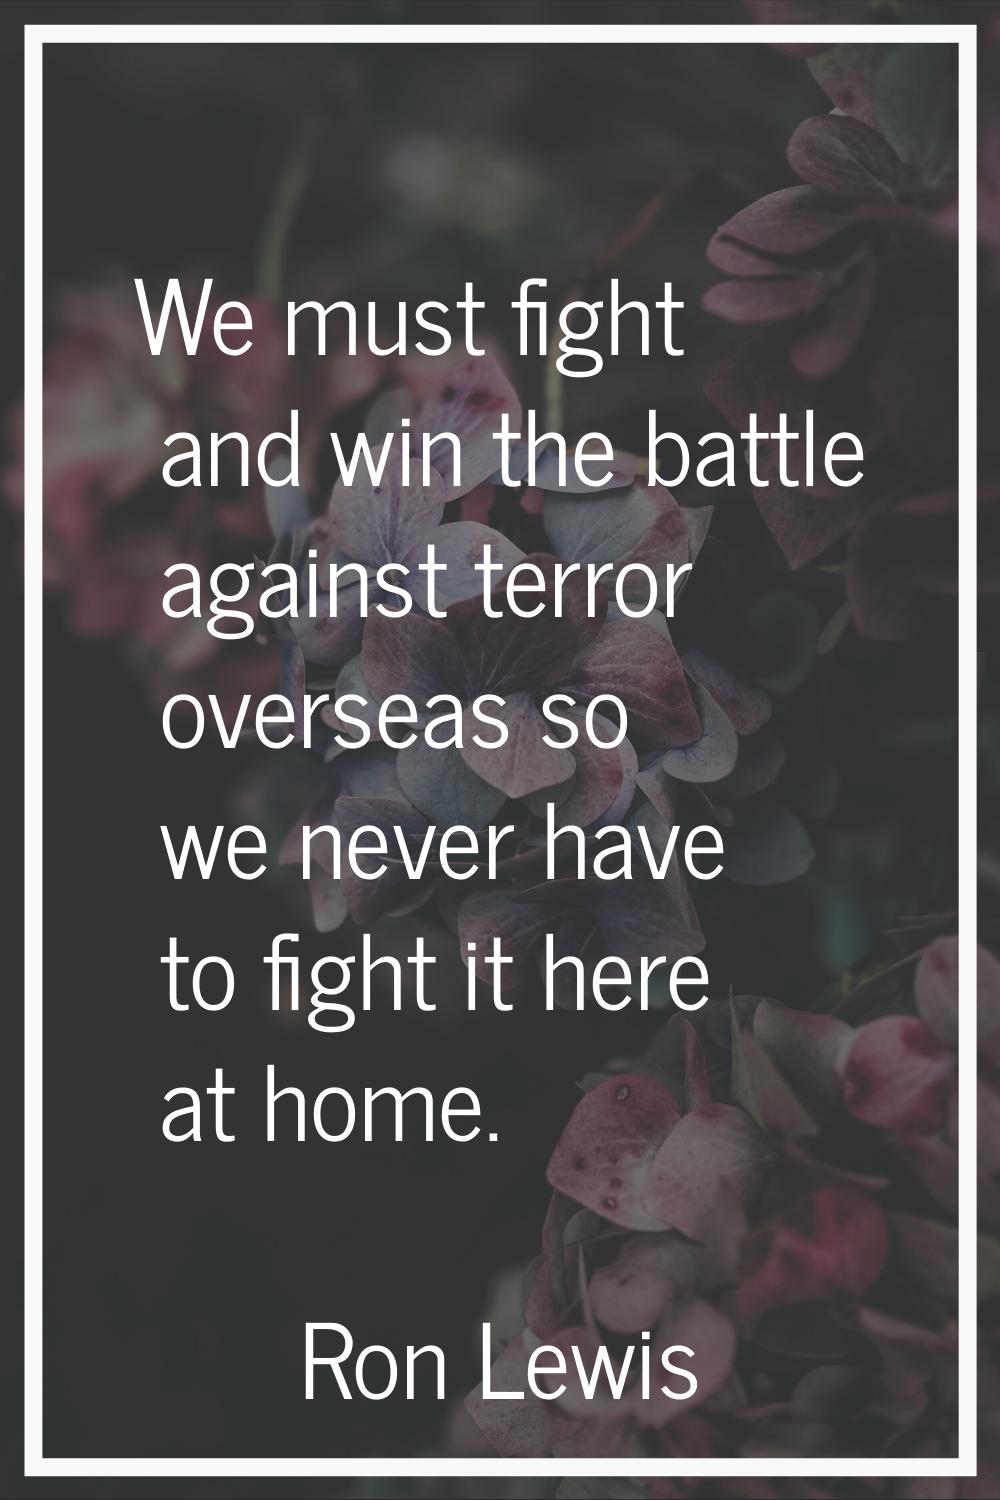 We must fight and win the battle against terror overseas so we never have to fight it here at home.